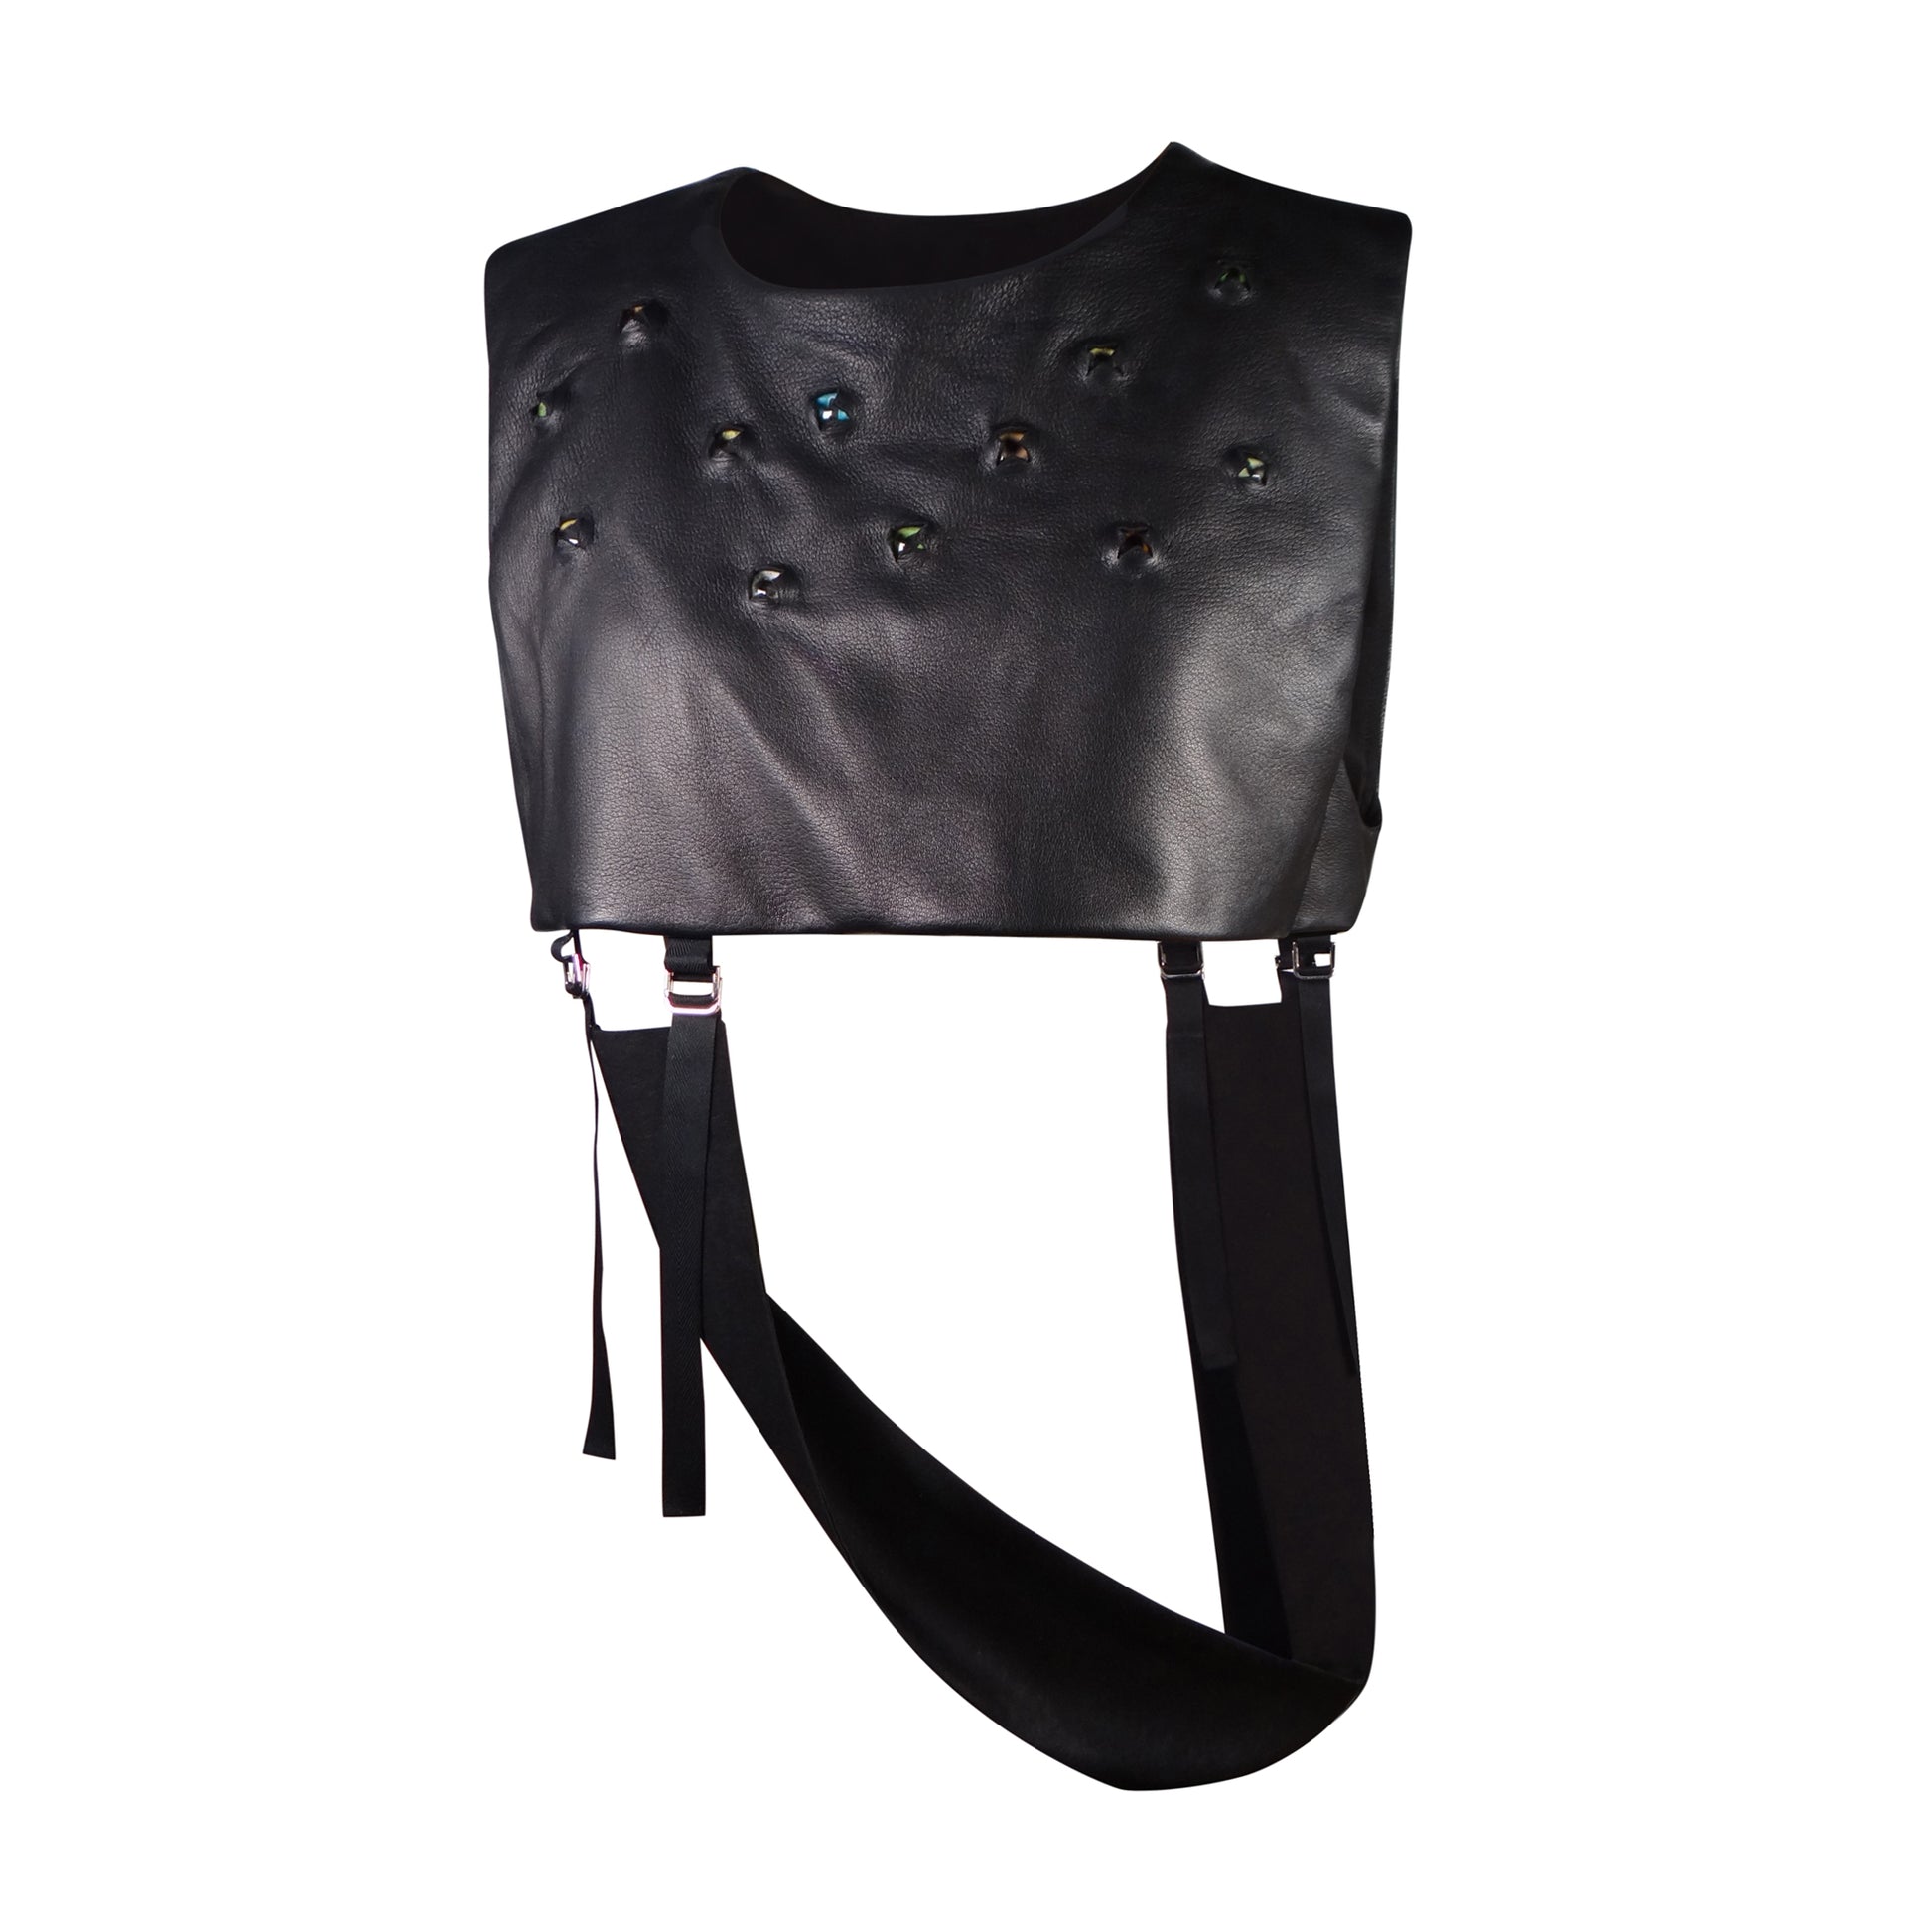 Embedded Evil Eye Leather Harness with Satin Sash - LLESSUR NYC